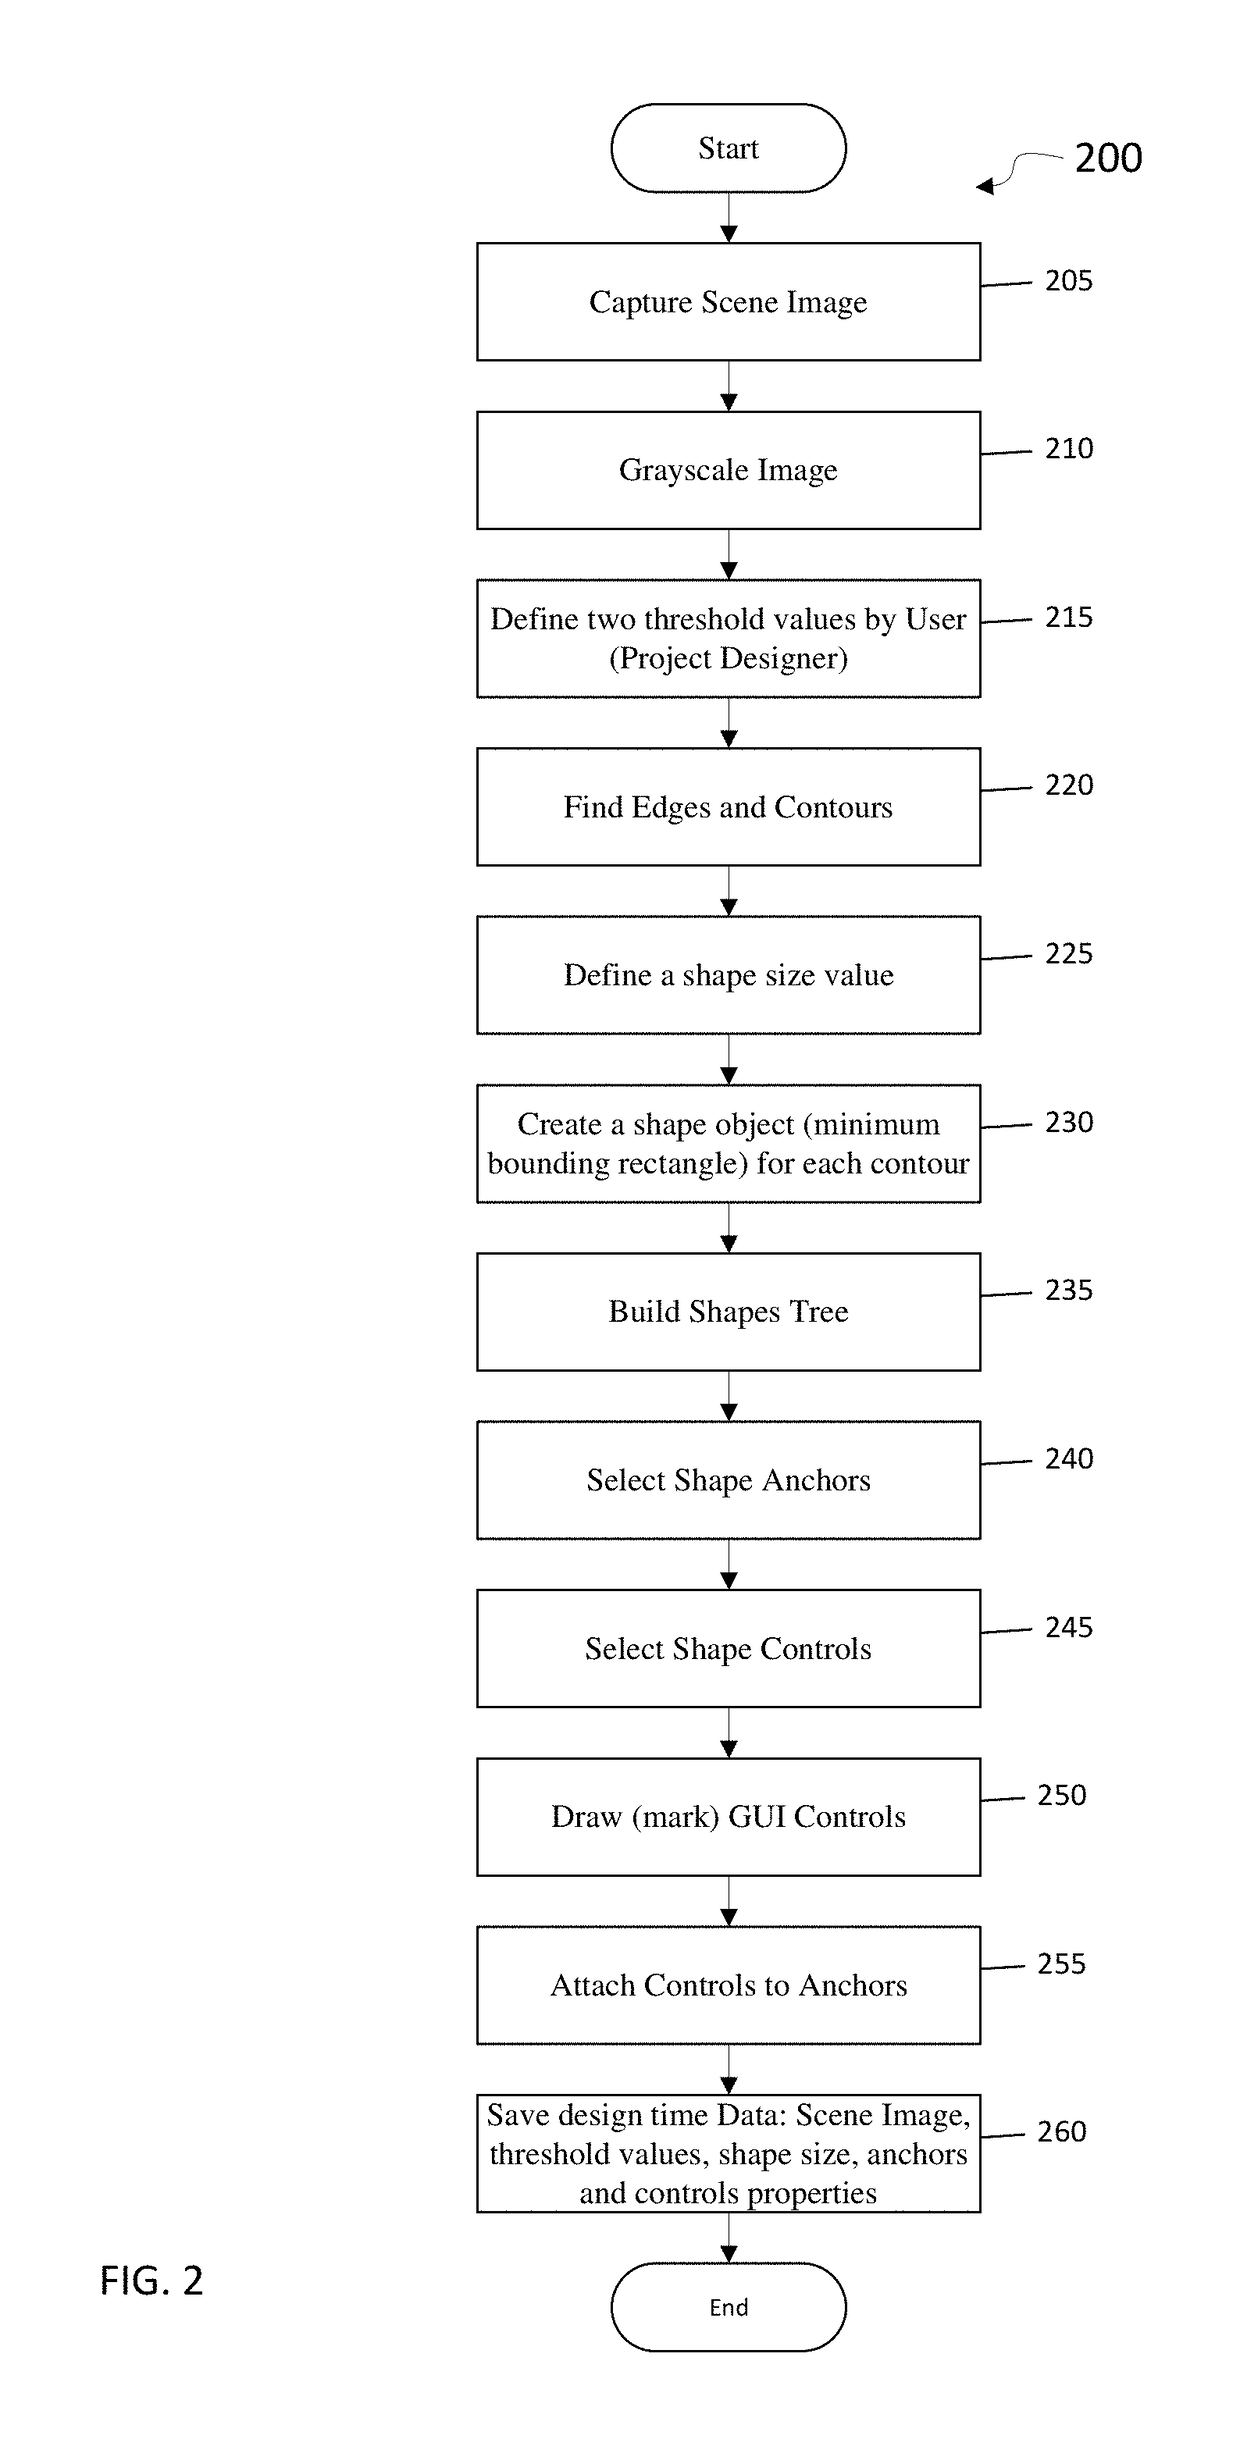 Image based method and system for building object model and application states comparison and graphic-based interoperability with an application